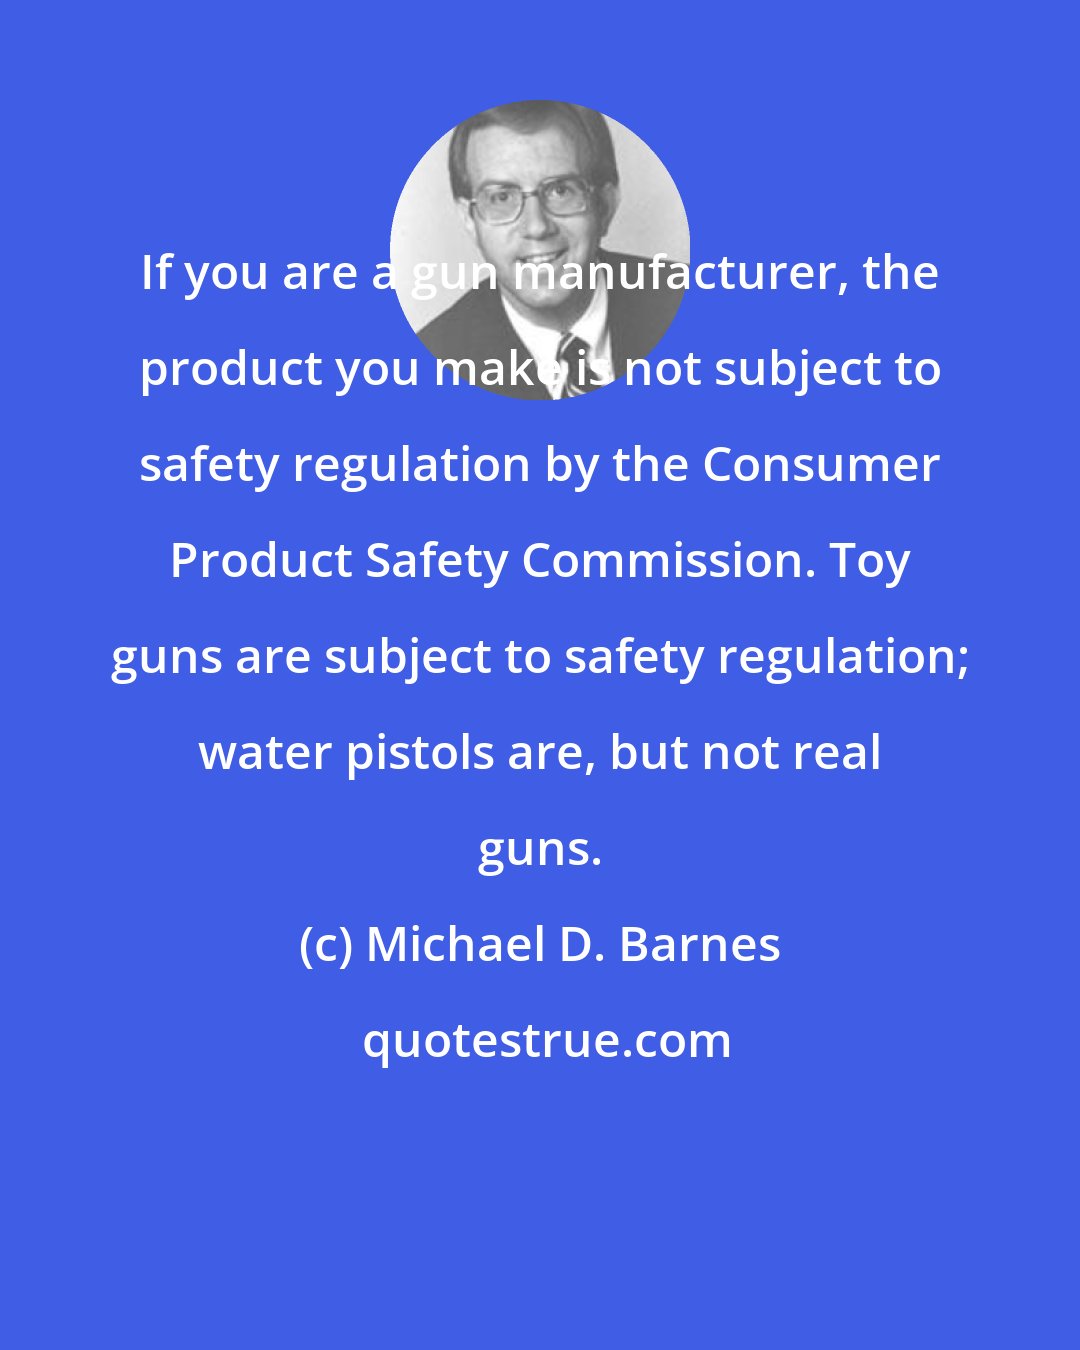 Michael D. Barnes: If you are a gun manufacturer, the product you make is not subject to safety regulation by the Consumer Product Safety Commission. Toy guns are subject to safety regulation; water pistols are, but not real guns.